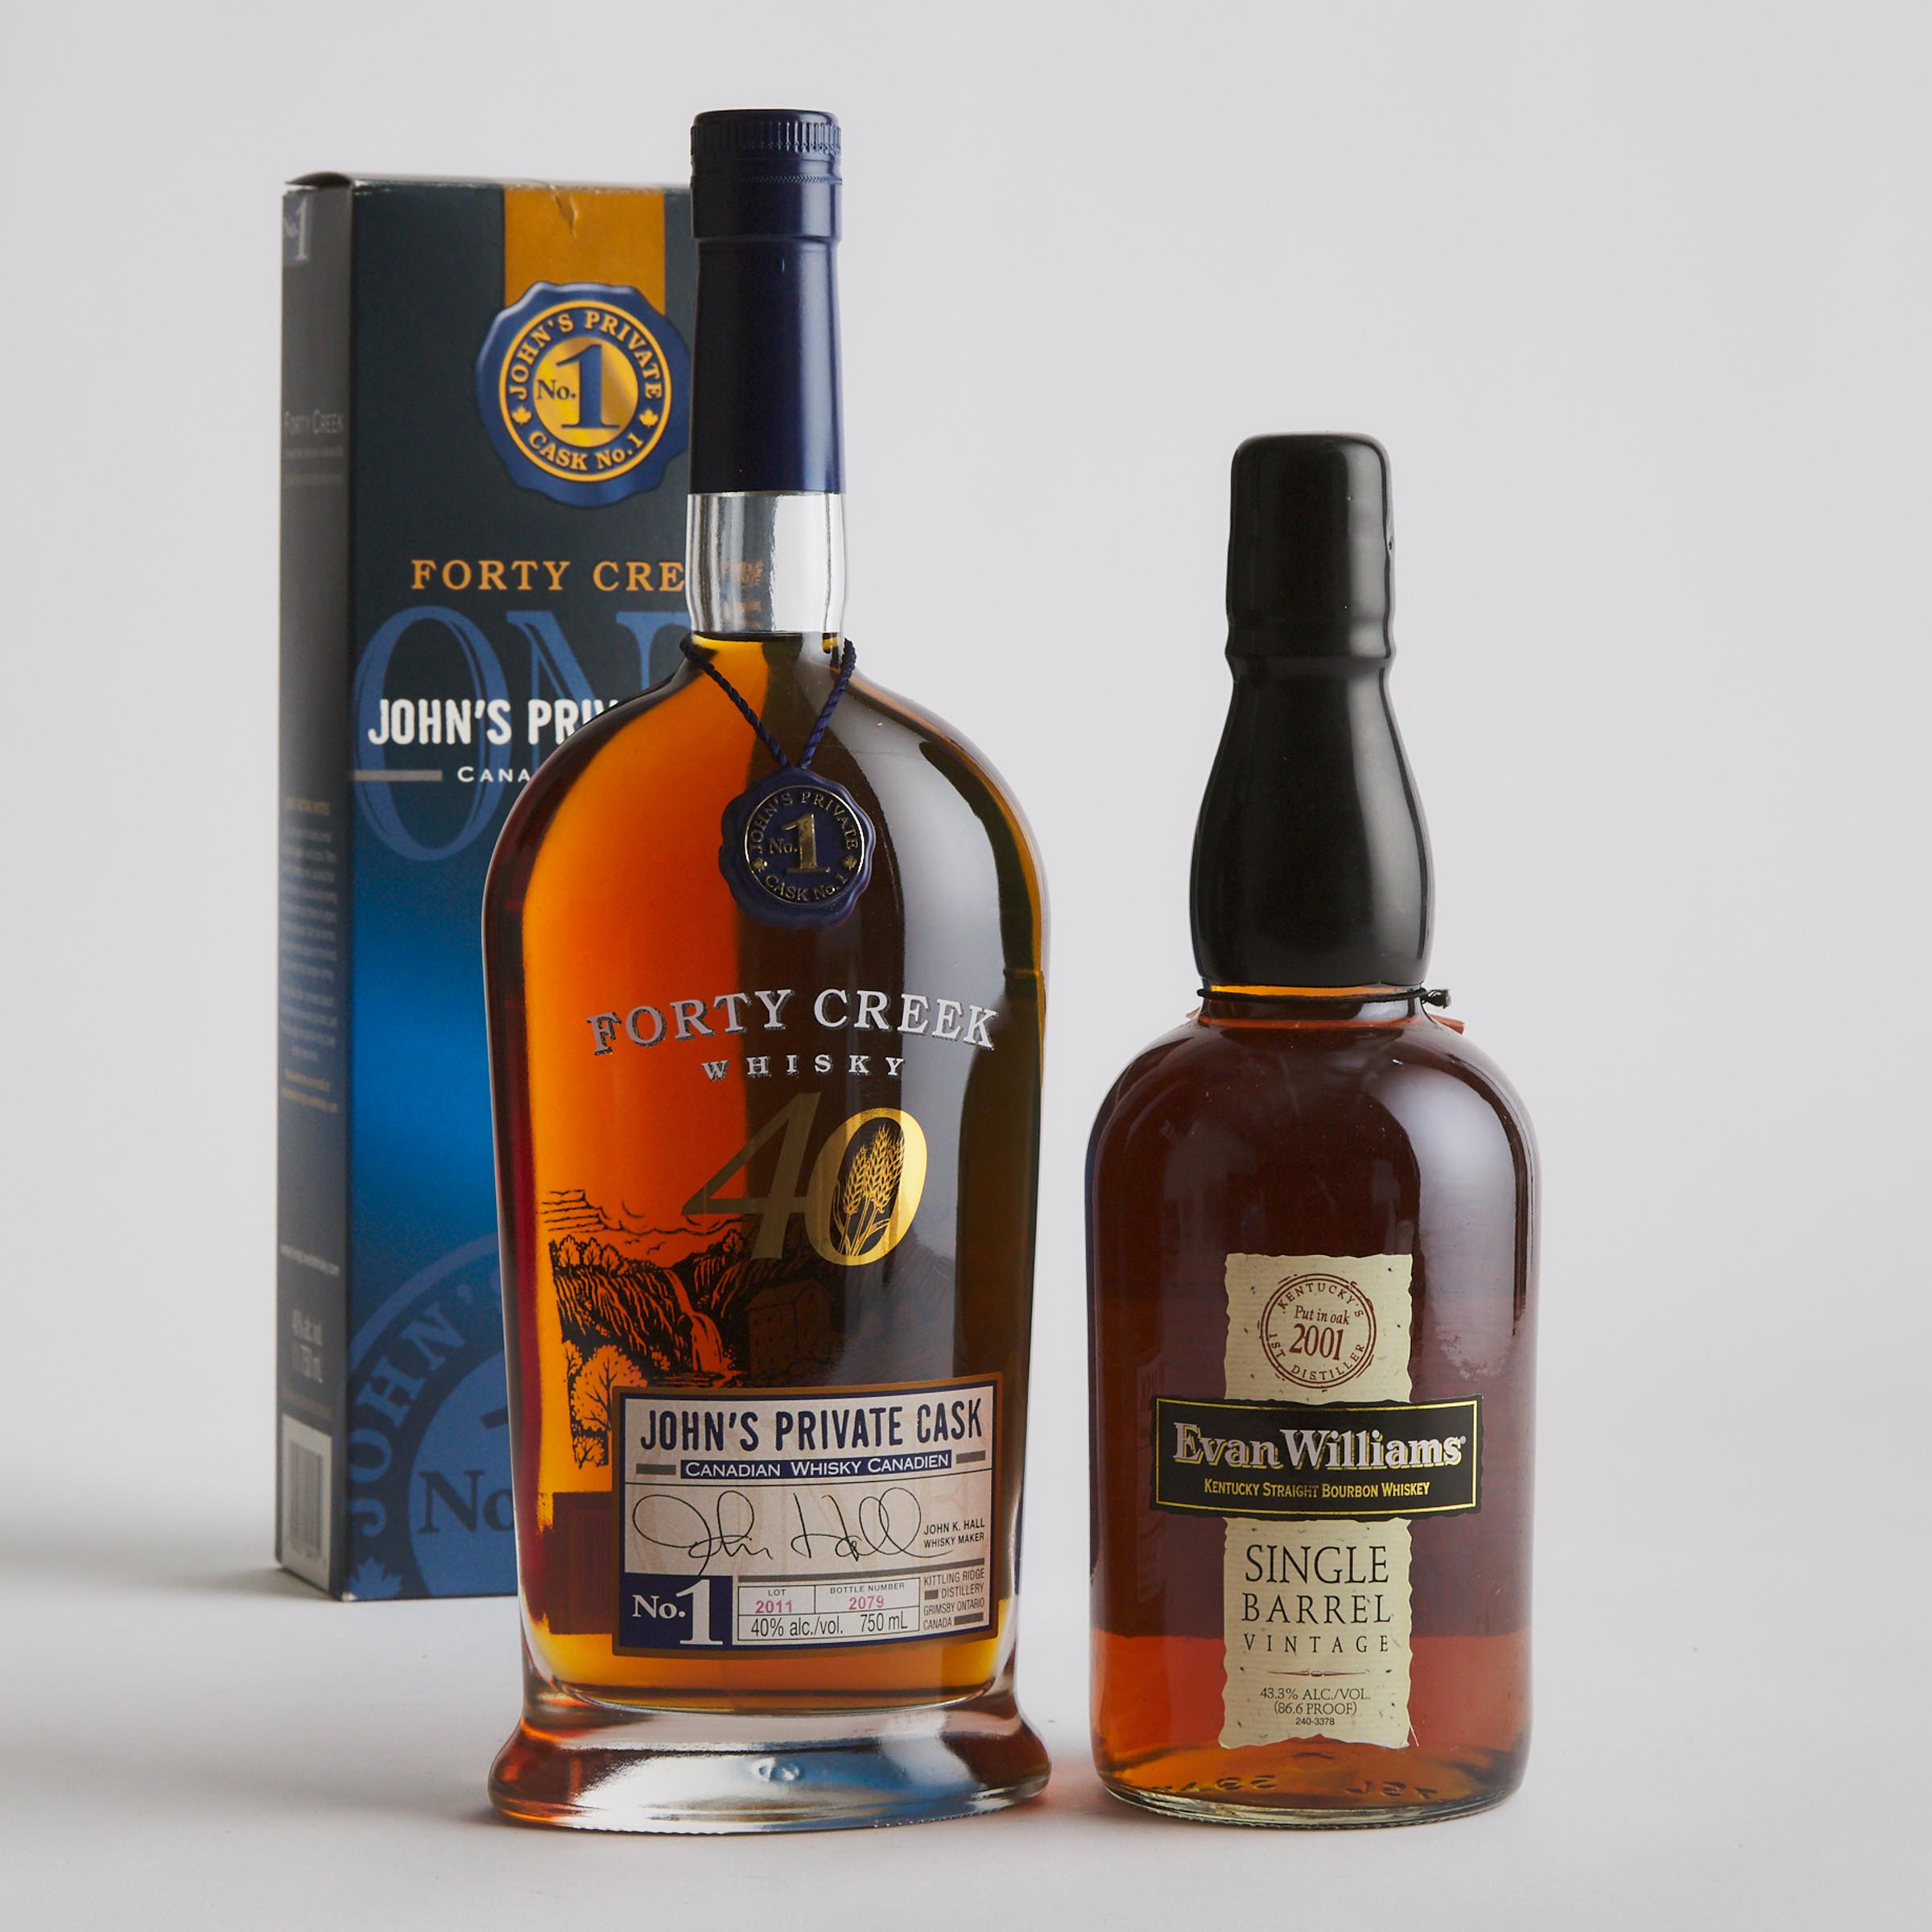 EVAN WILLIAMS KENTUCKY STRAIGHT BOURBON WHISKEY (ONE 750 ML)
FORTY CREEK JOHN'S PRIVATE CASK CANADIAN WHISKY (ONE 750 ML)